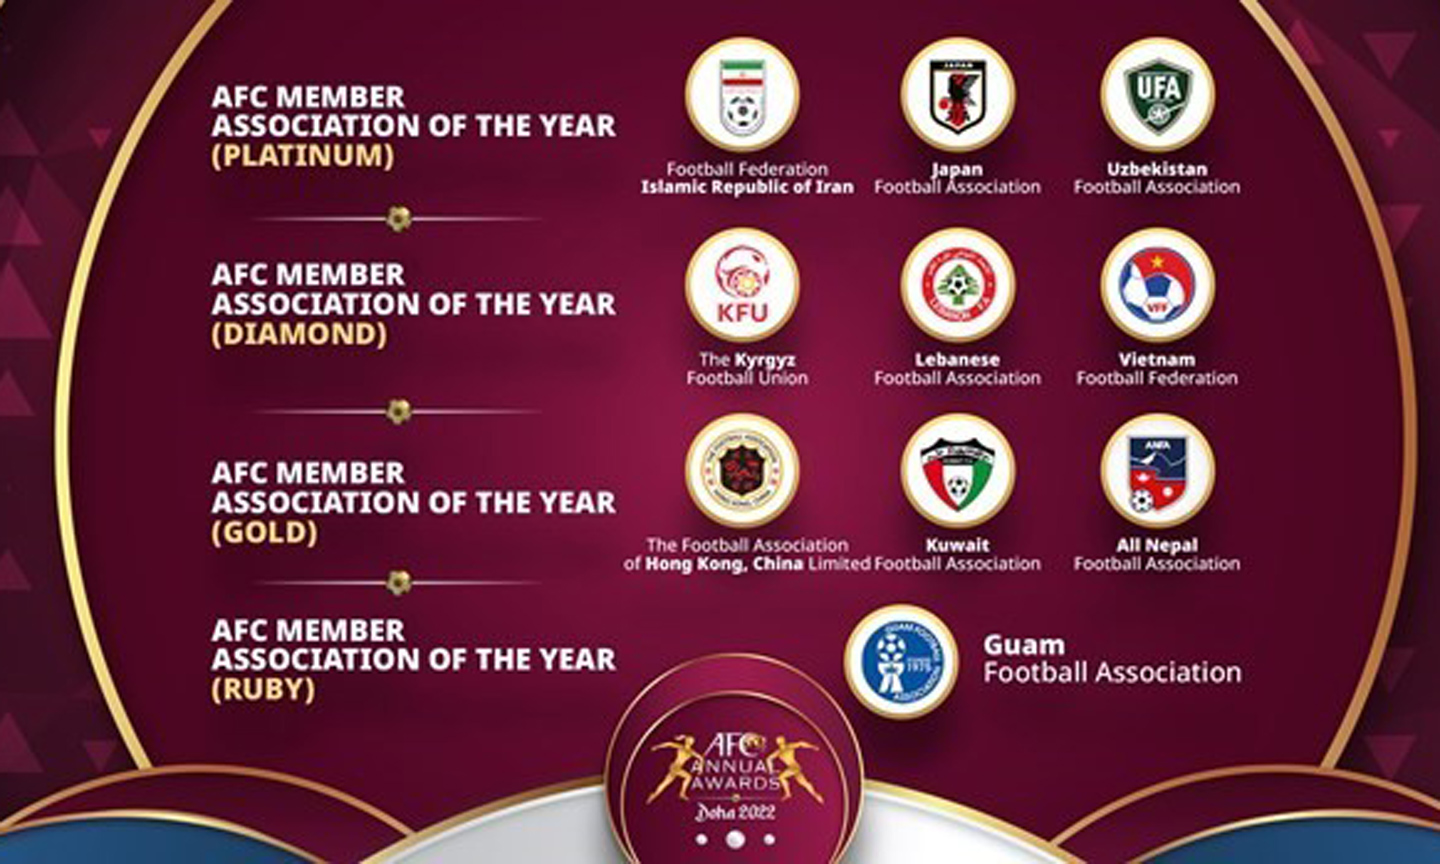 The Vietnam Football Federation (VFF) is among the top three nominees for the Asian Football Confederation (AFC) Diamond of Asia accolade presented to its best member association of the year at the upcoming AFC Annual Awards. (Photo: AFC).